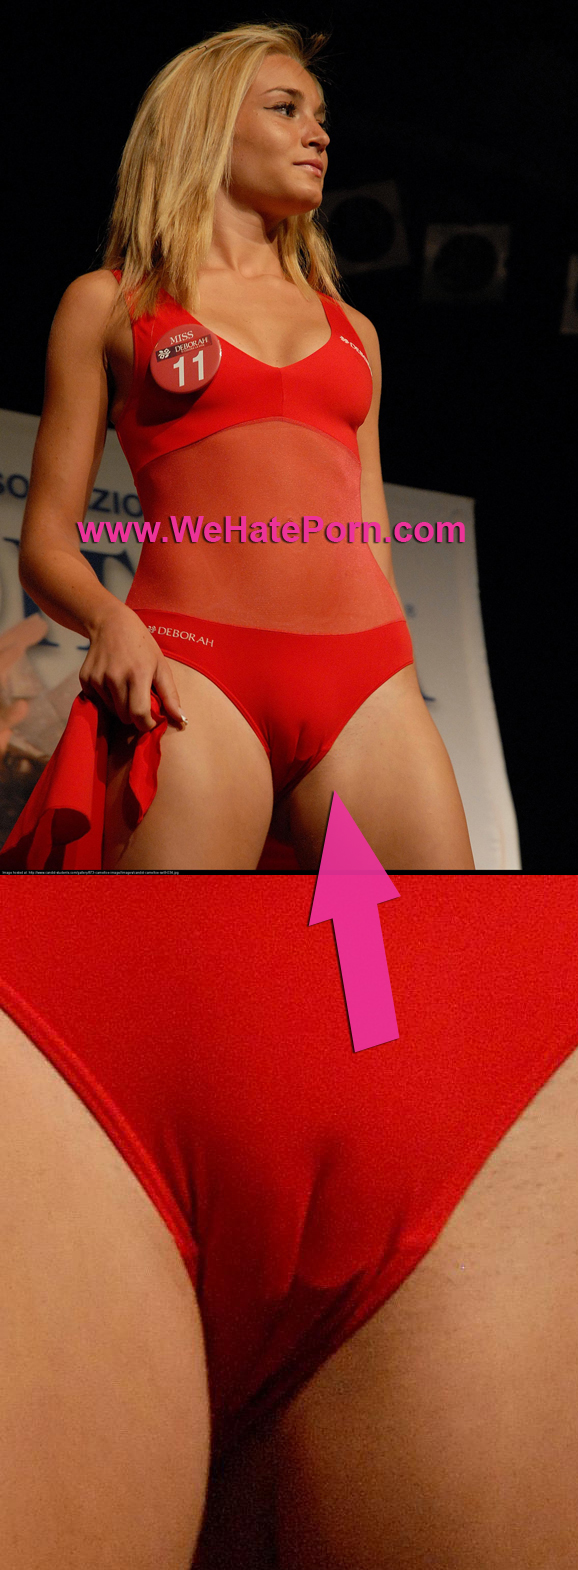 Sexy Thong Camel Toe Upskirt - Beauty Pageant Swimsuit Cameltoe Oops